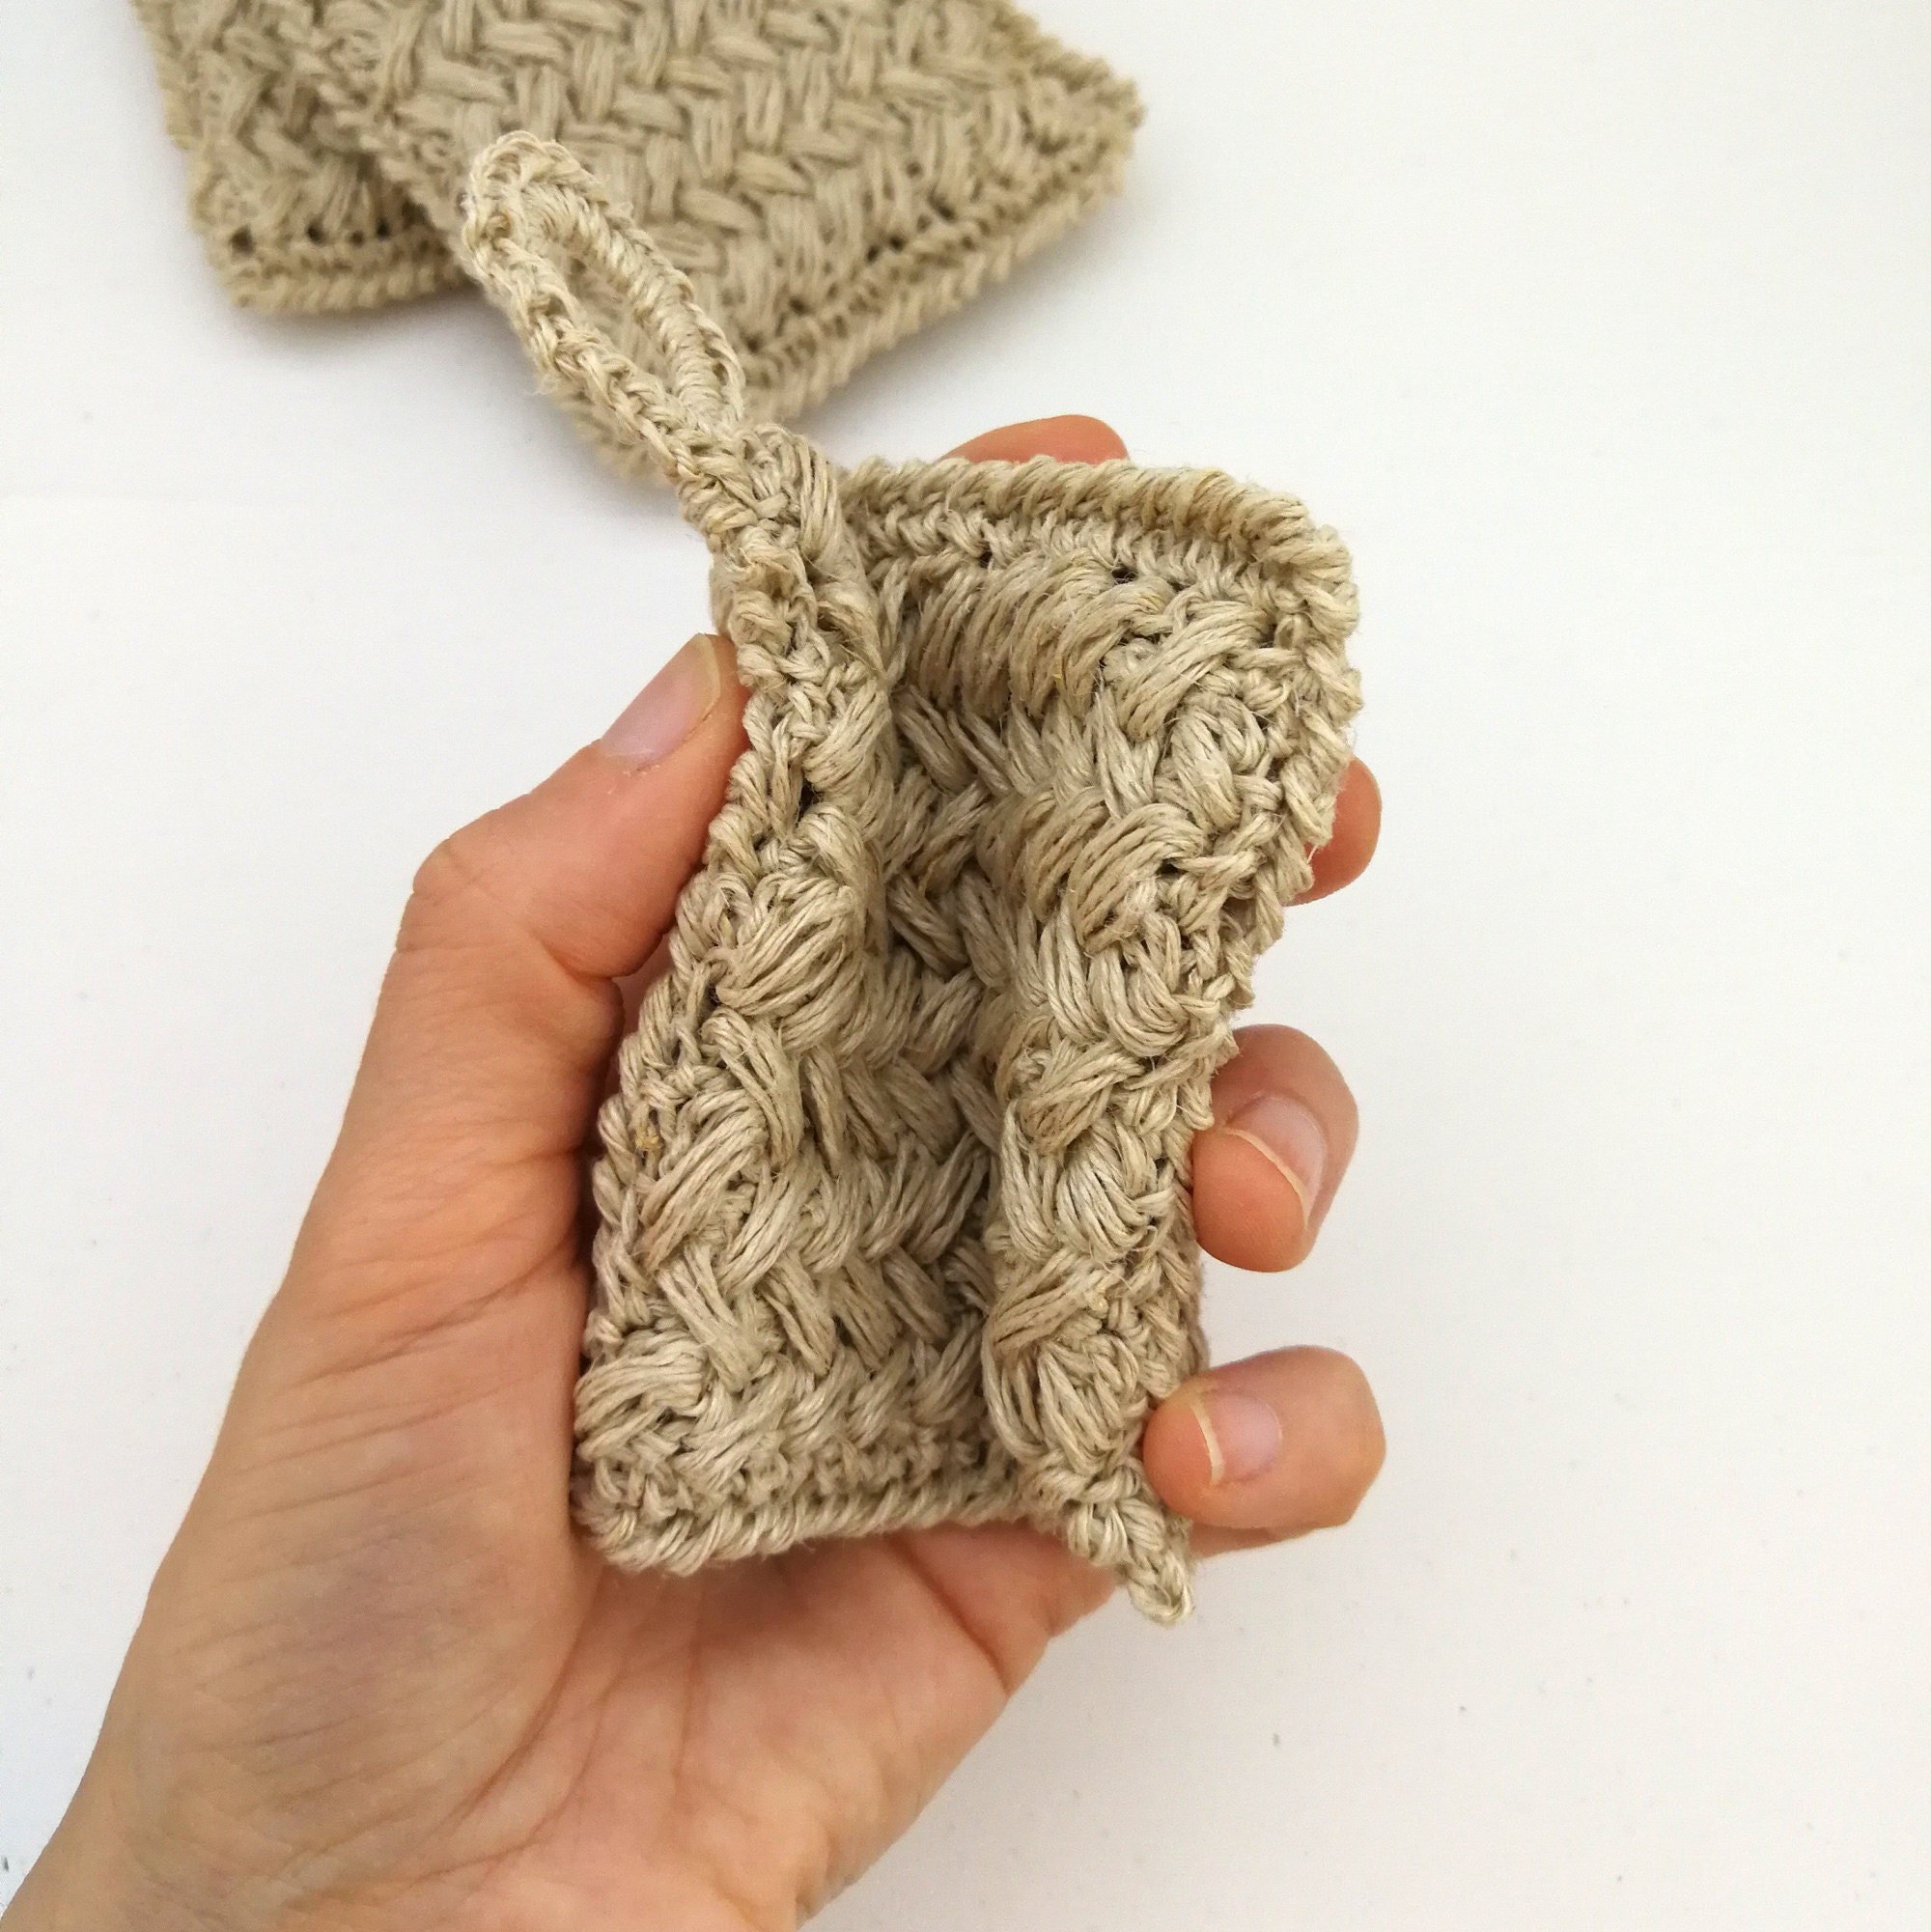 A left hand is holding 3 crochet kitchen scrubbies like a deck of cards. They have a braided type pattern. The sponge on the top has a small hanging loop on the top left.